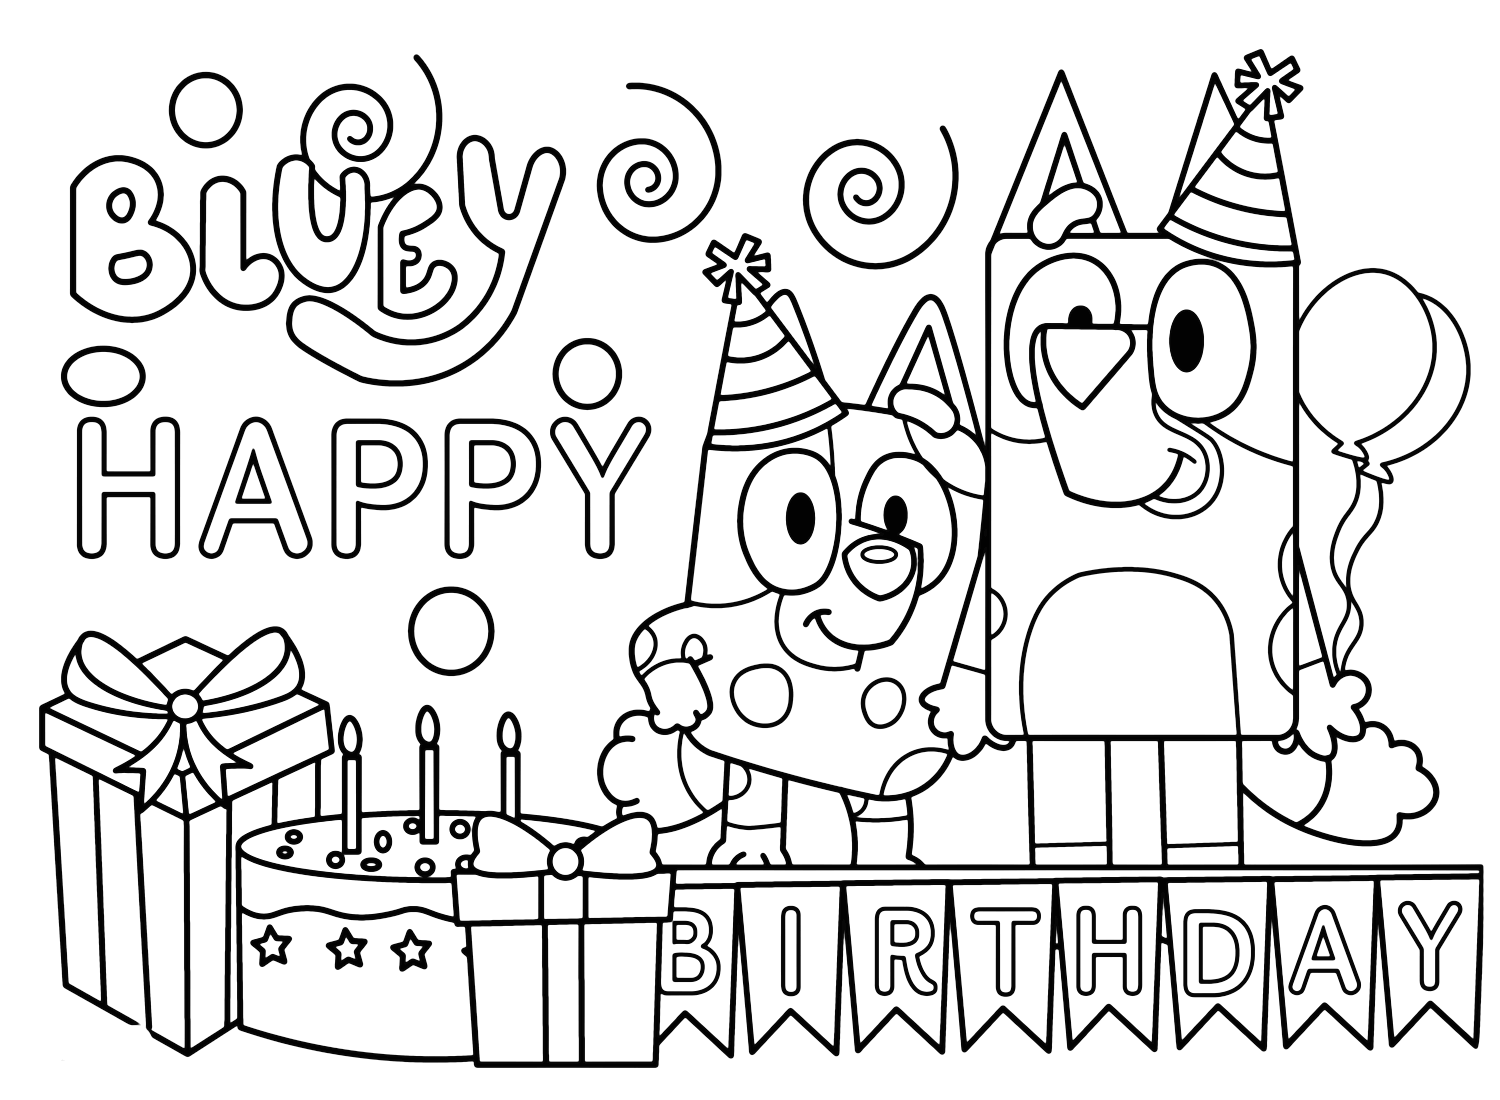 108 Bluey Coloring Pages - ColoringPagesOnly.com